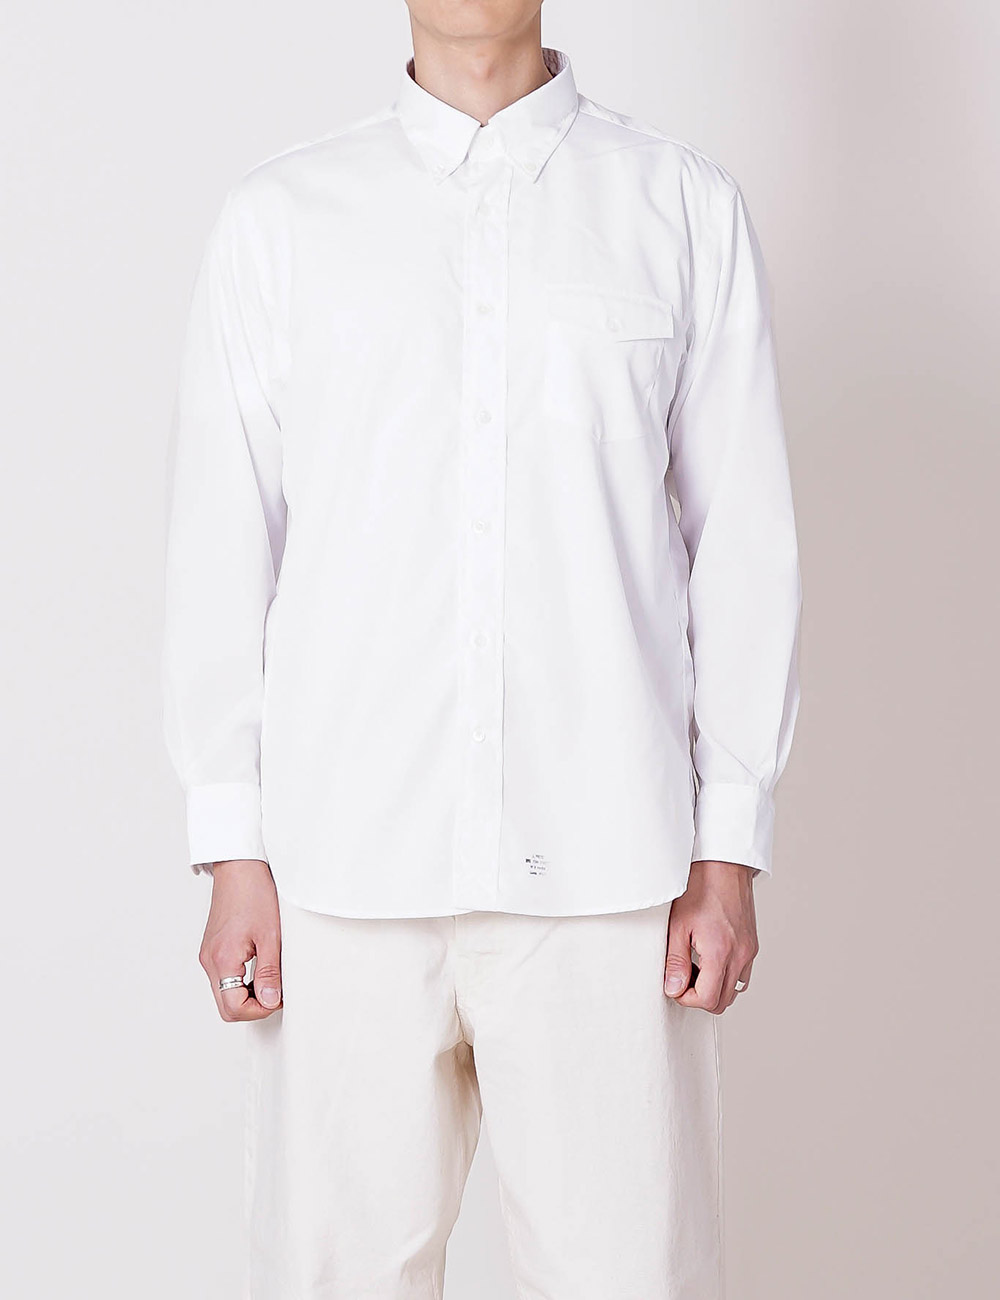 Broadcloth B.D. Authentic Fit (White)